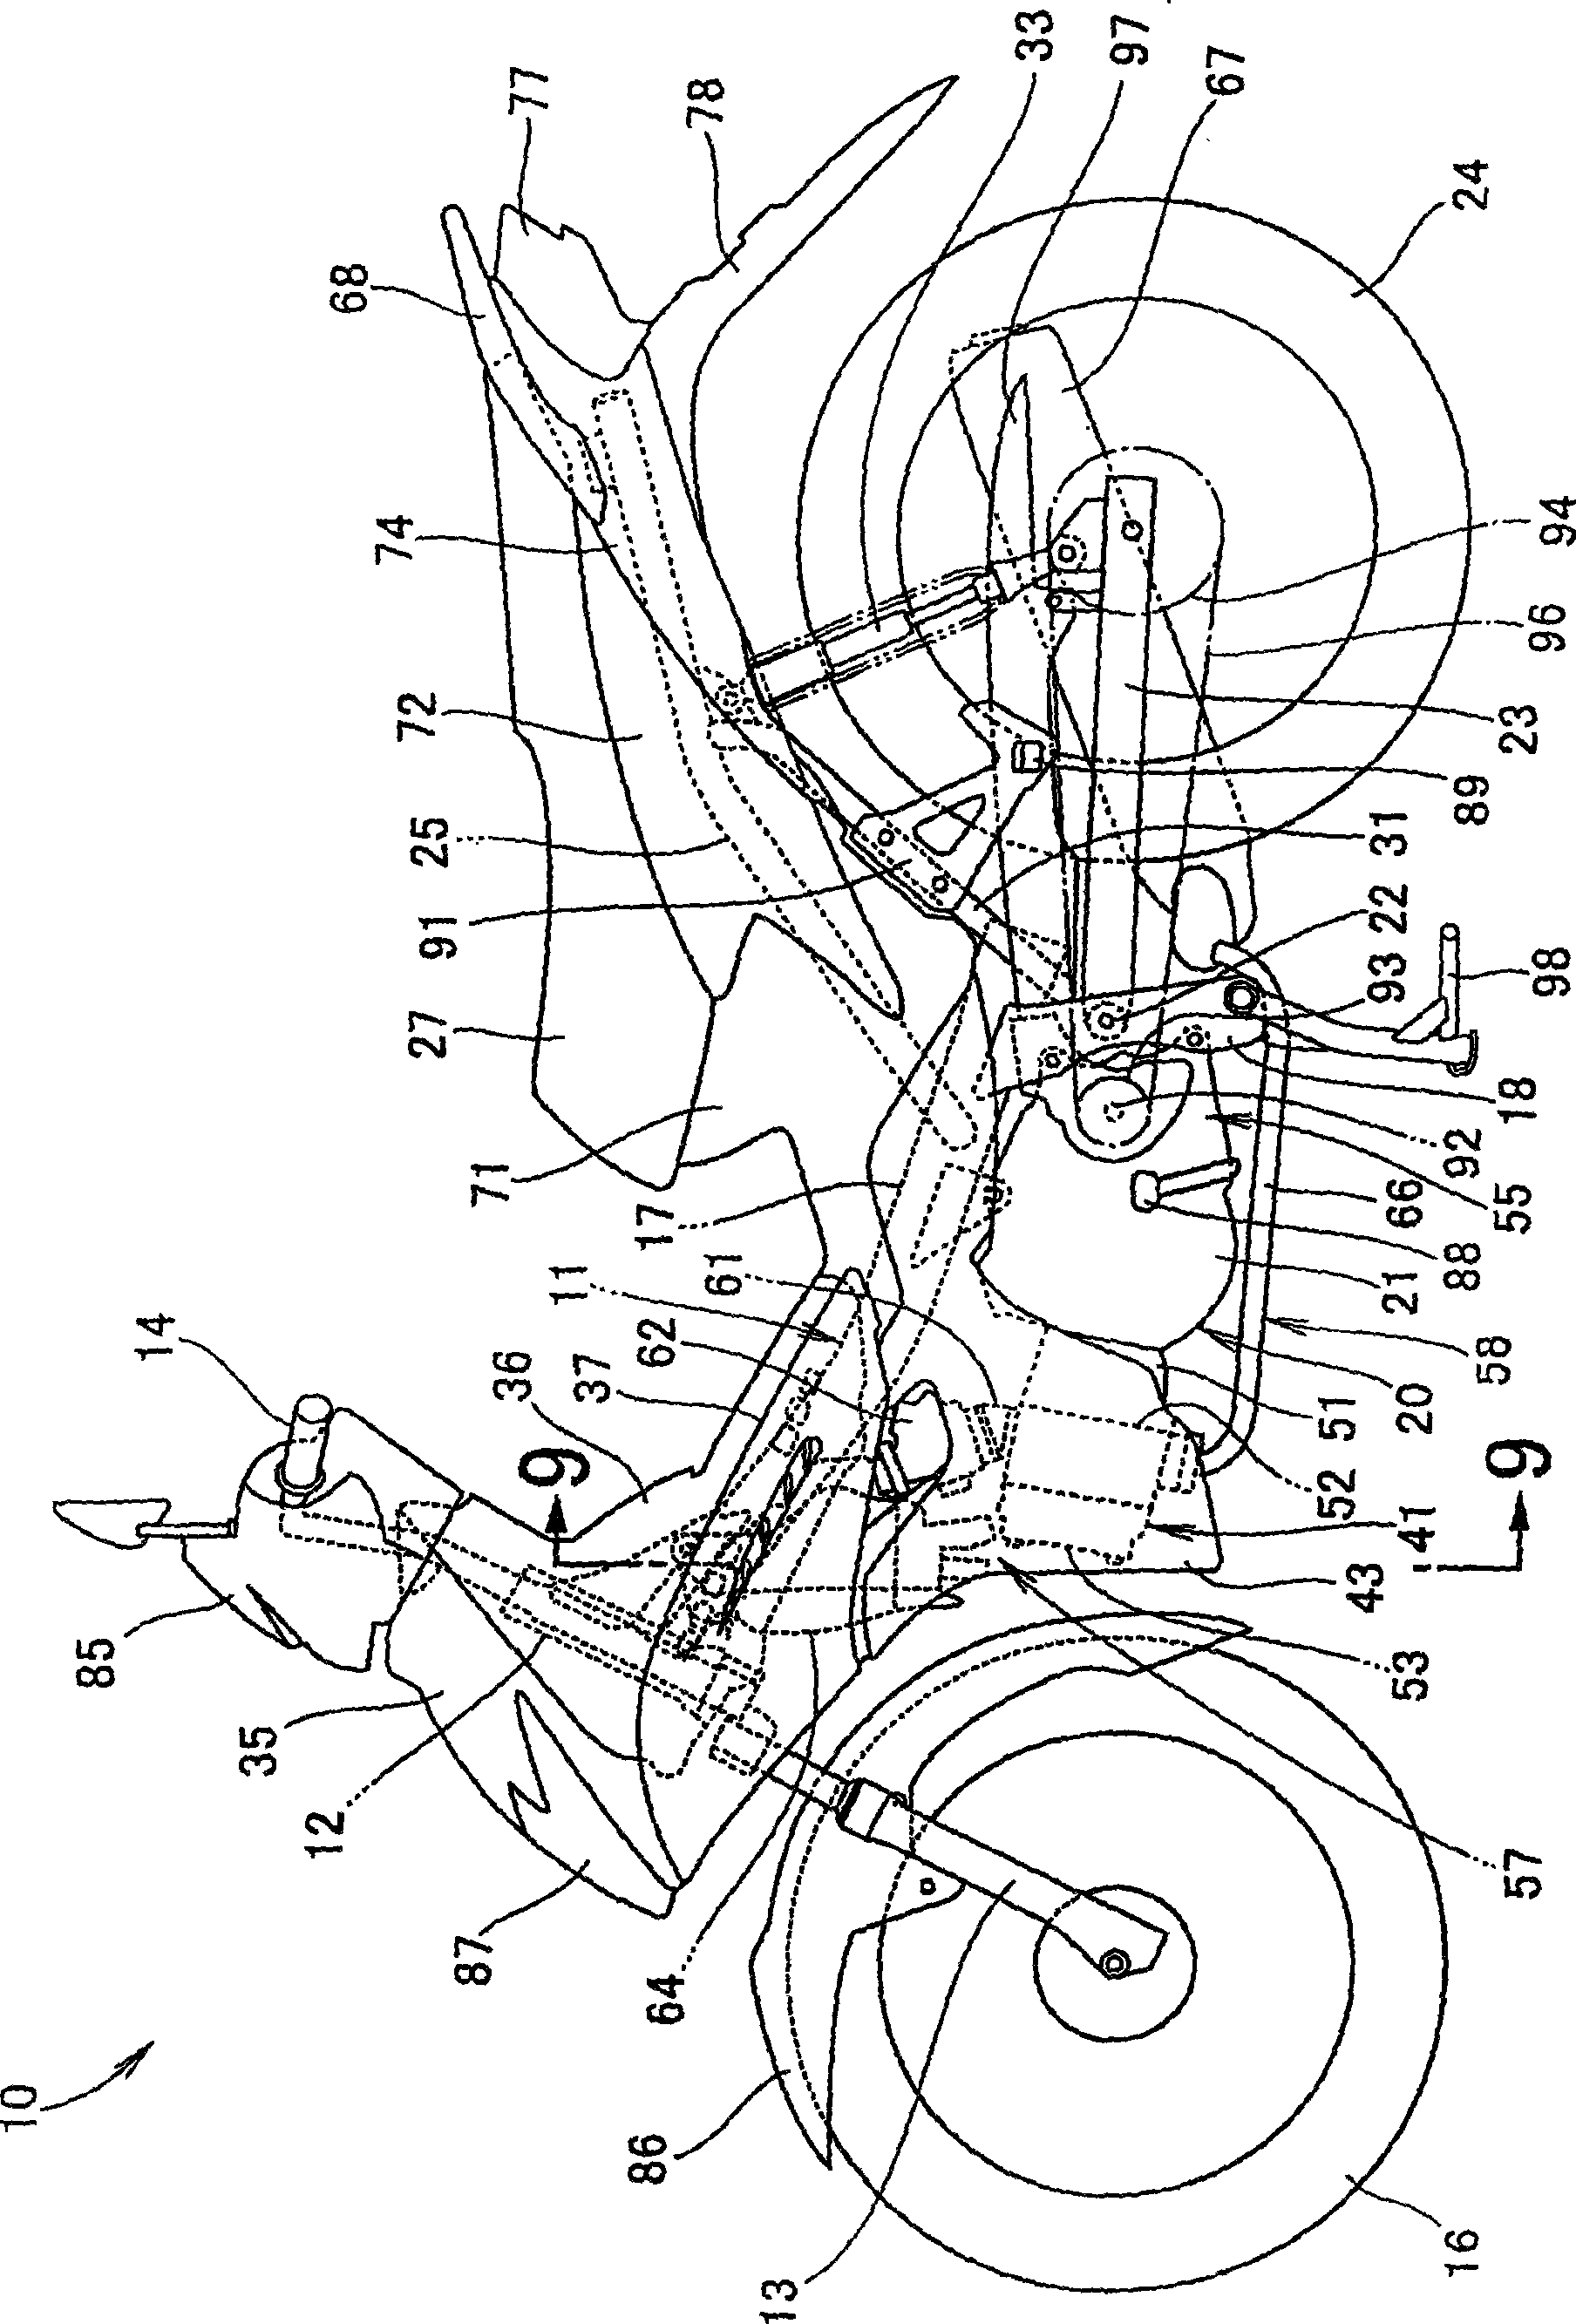 Air filtering device structure of automobiles with two wheels